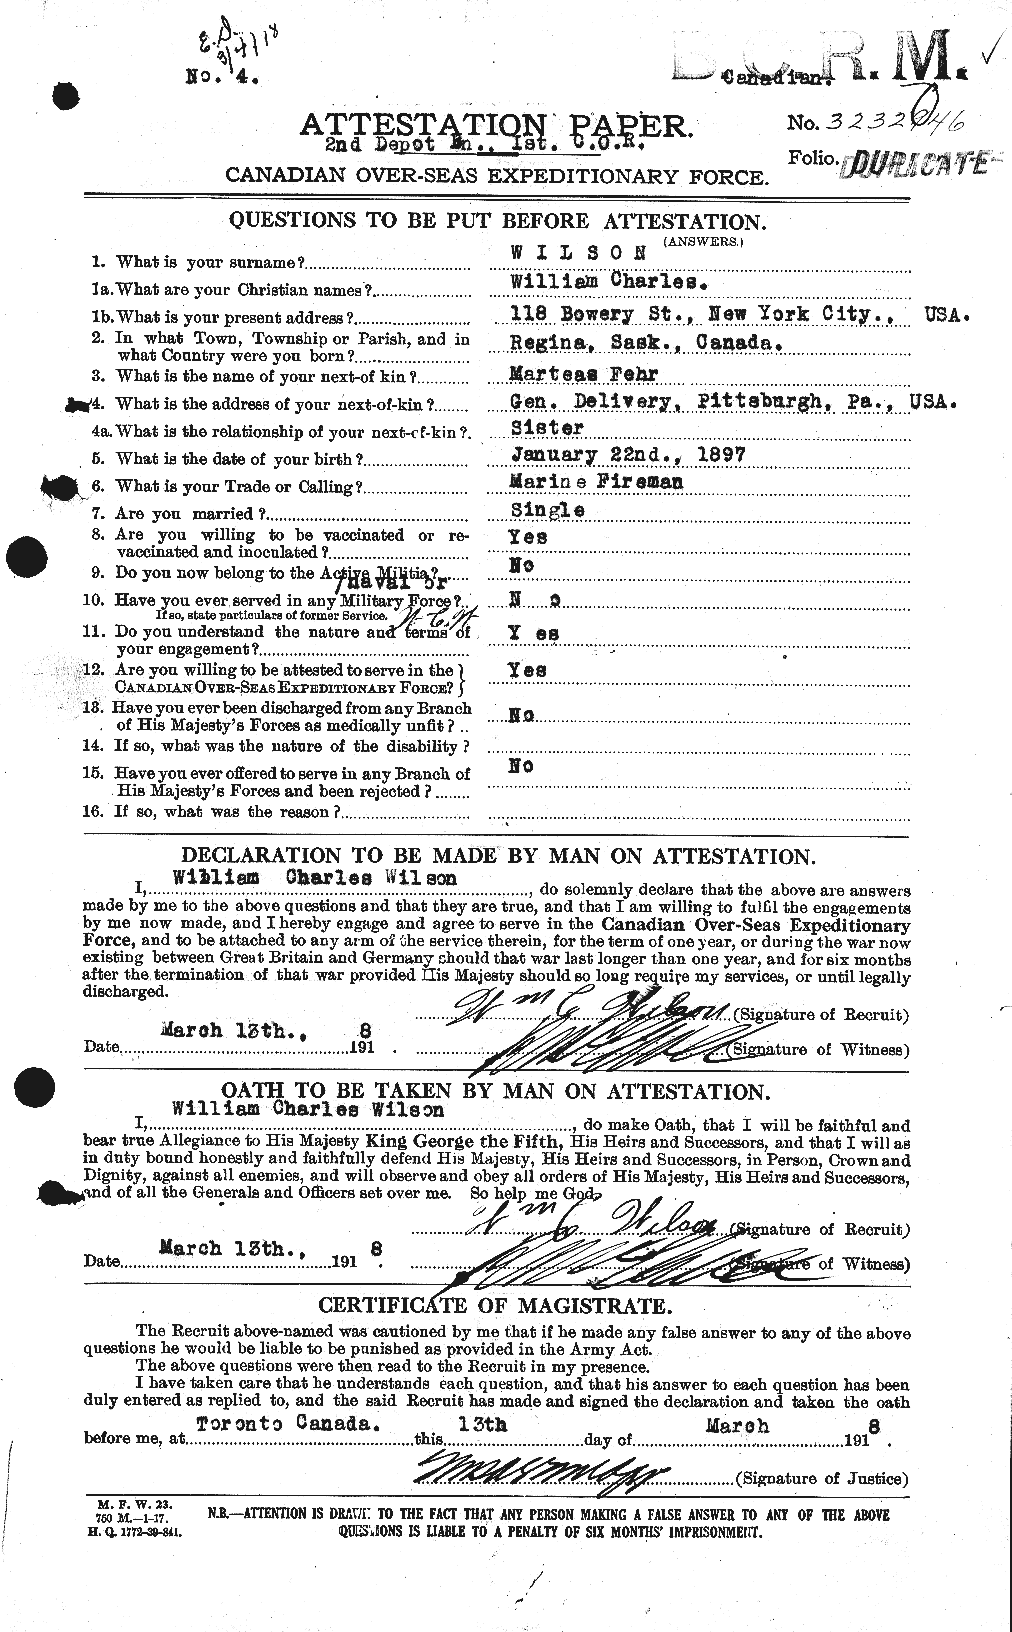 Personnel Records of the First World War - CEF 681950a